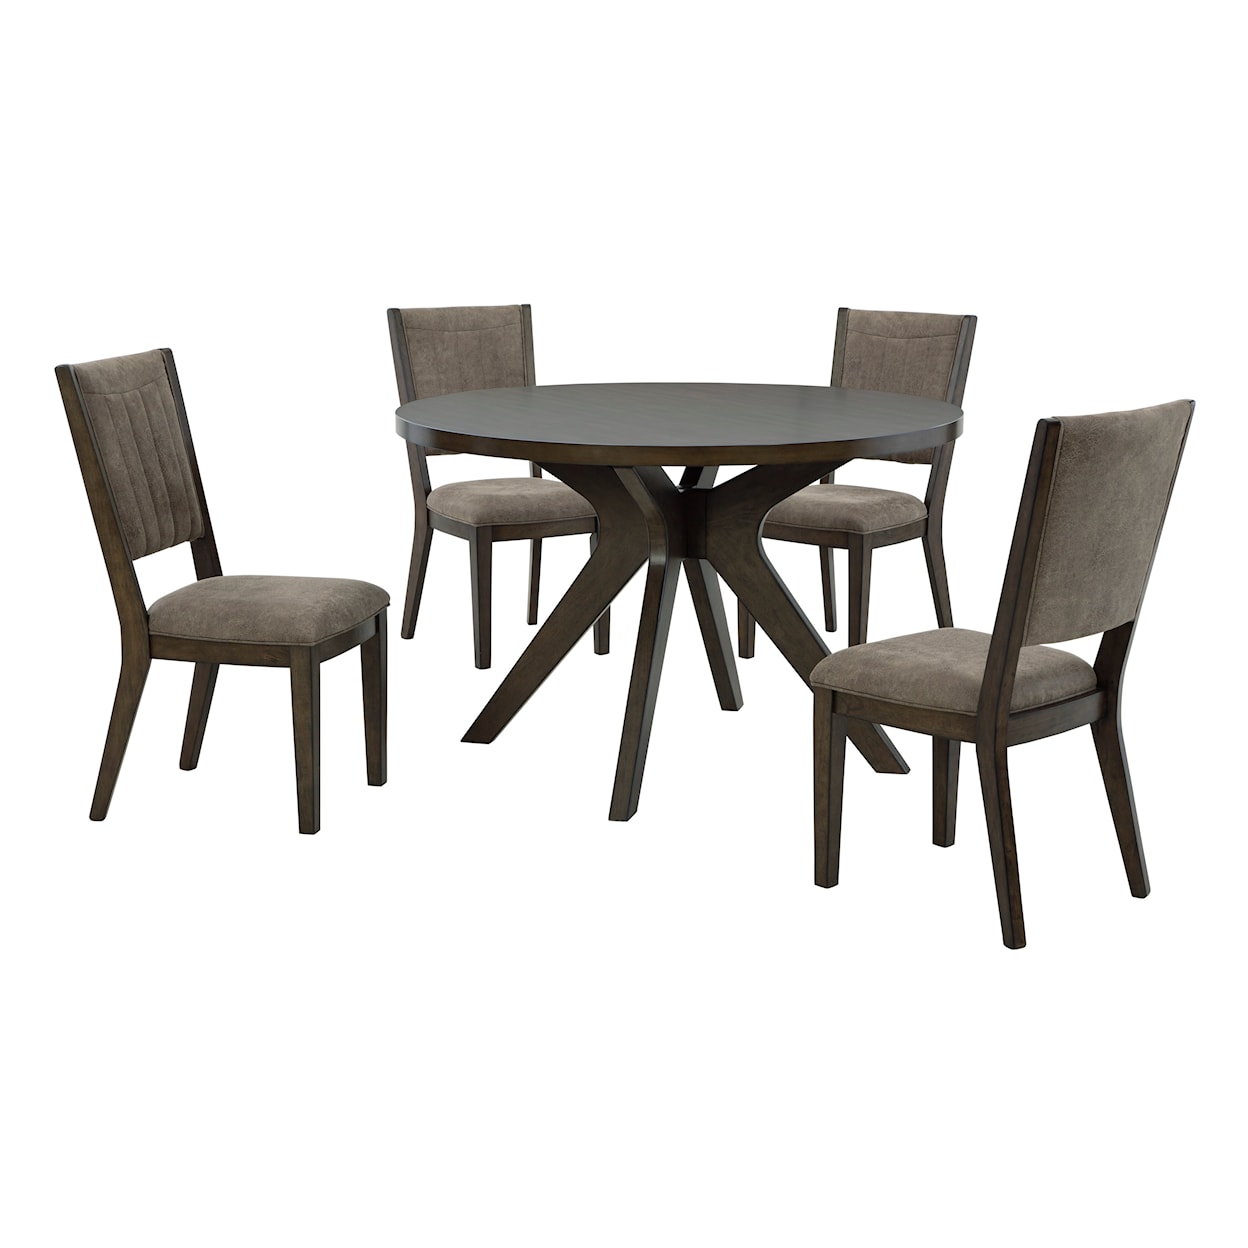 Signature Design by Ashley Furniture Wittland 4-Piece Dining Set